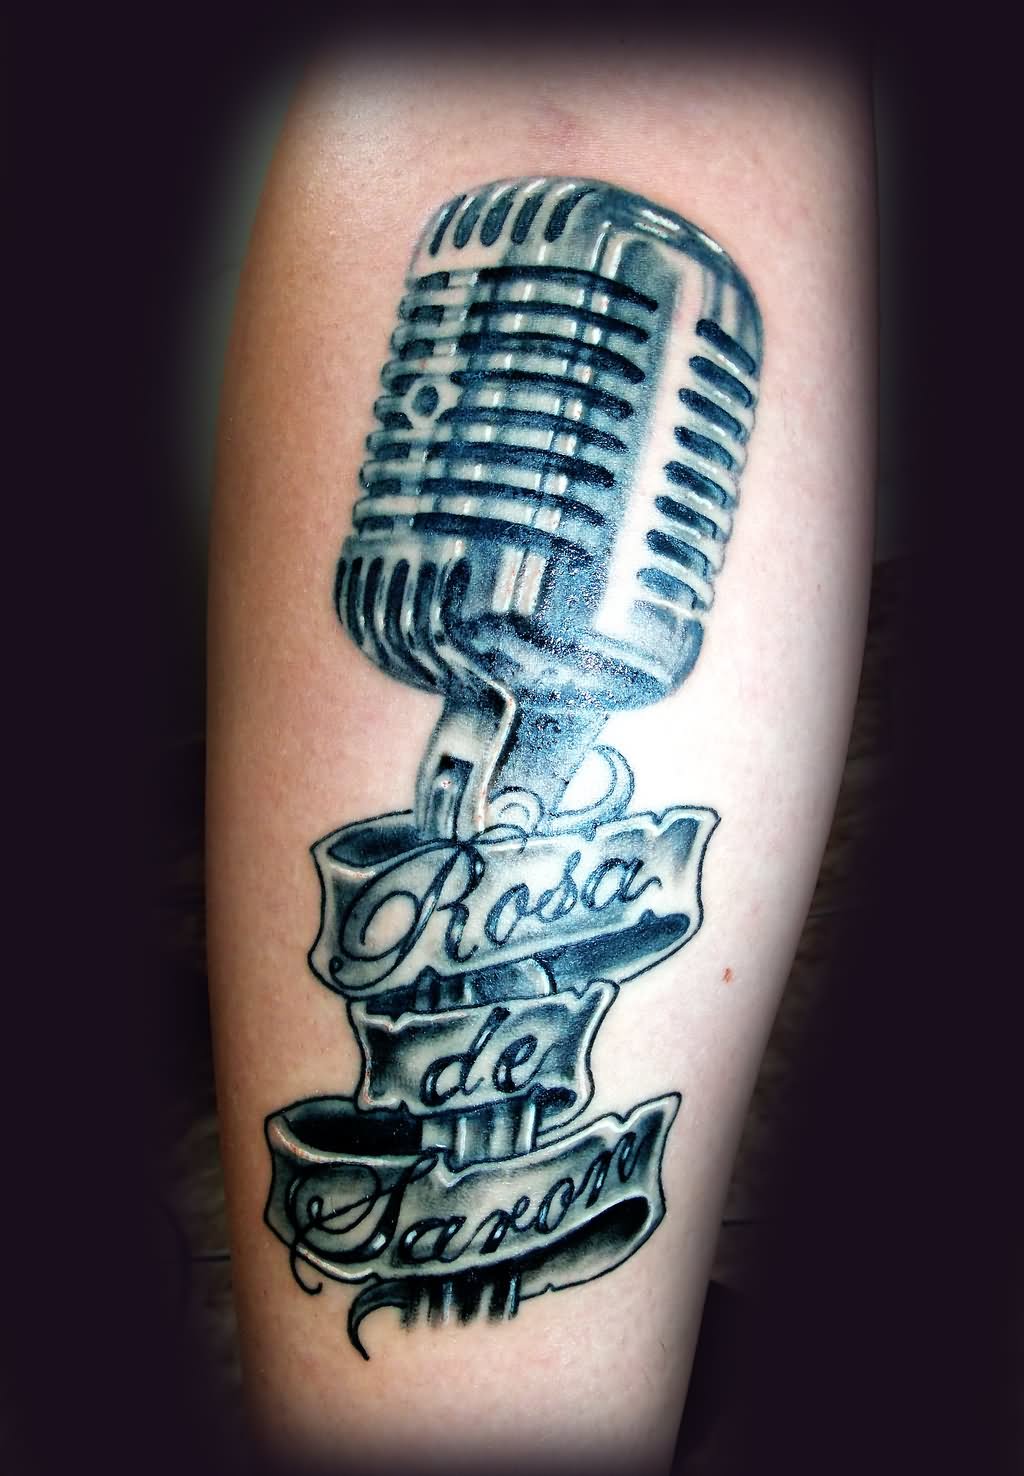 Microphone With Rosa De Saron Banner Tattoo by Eder1985